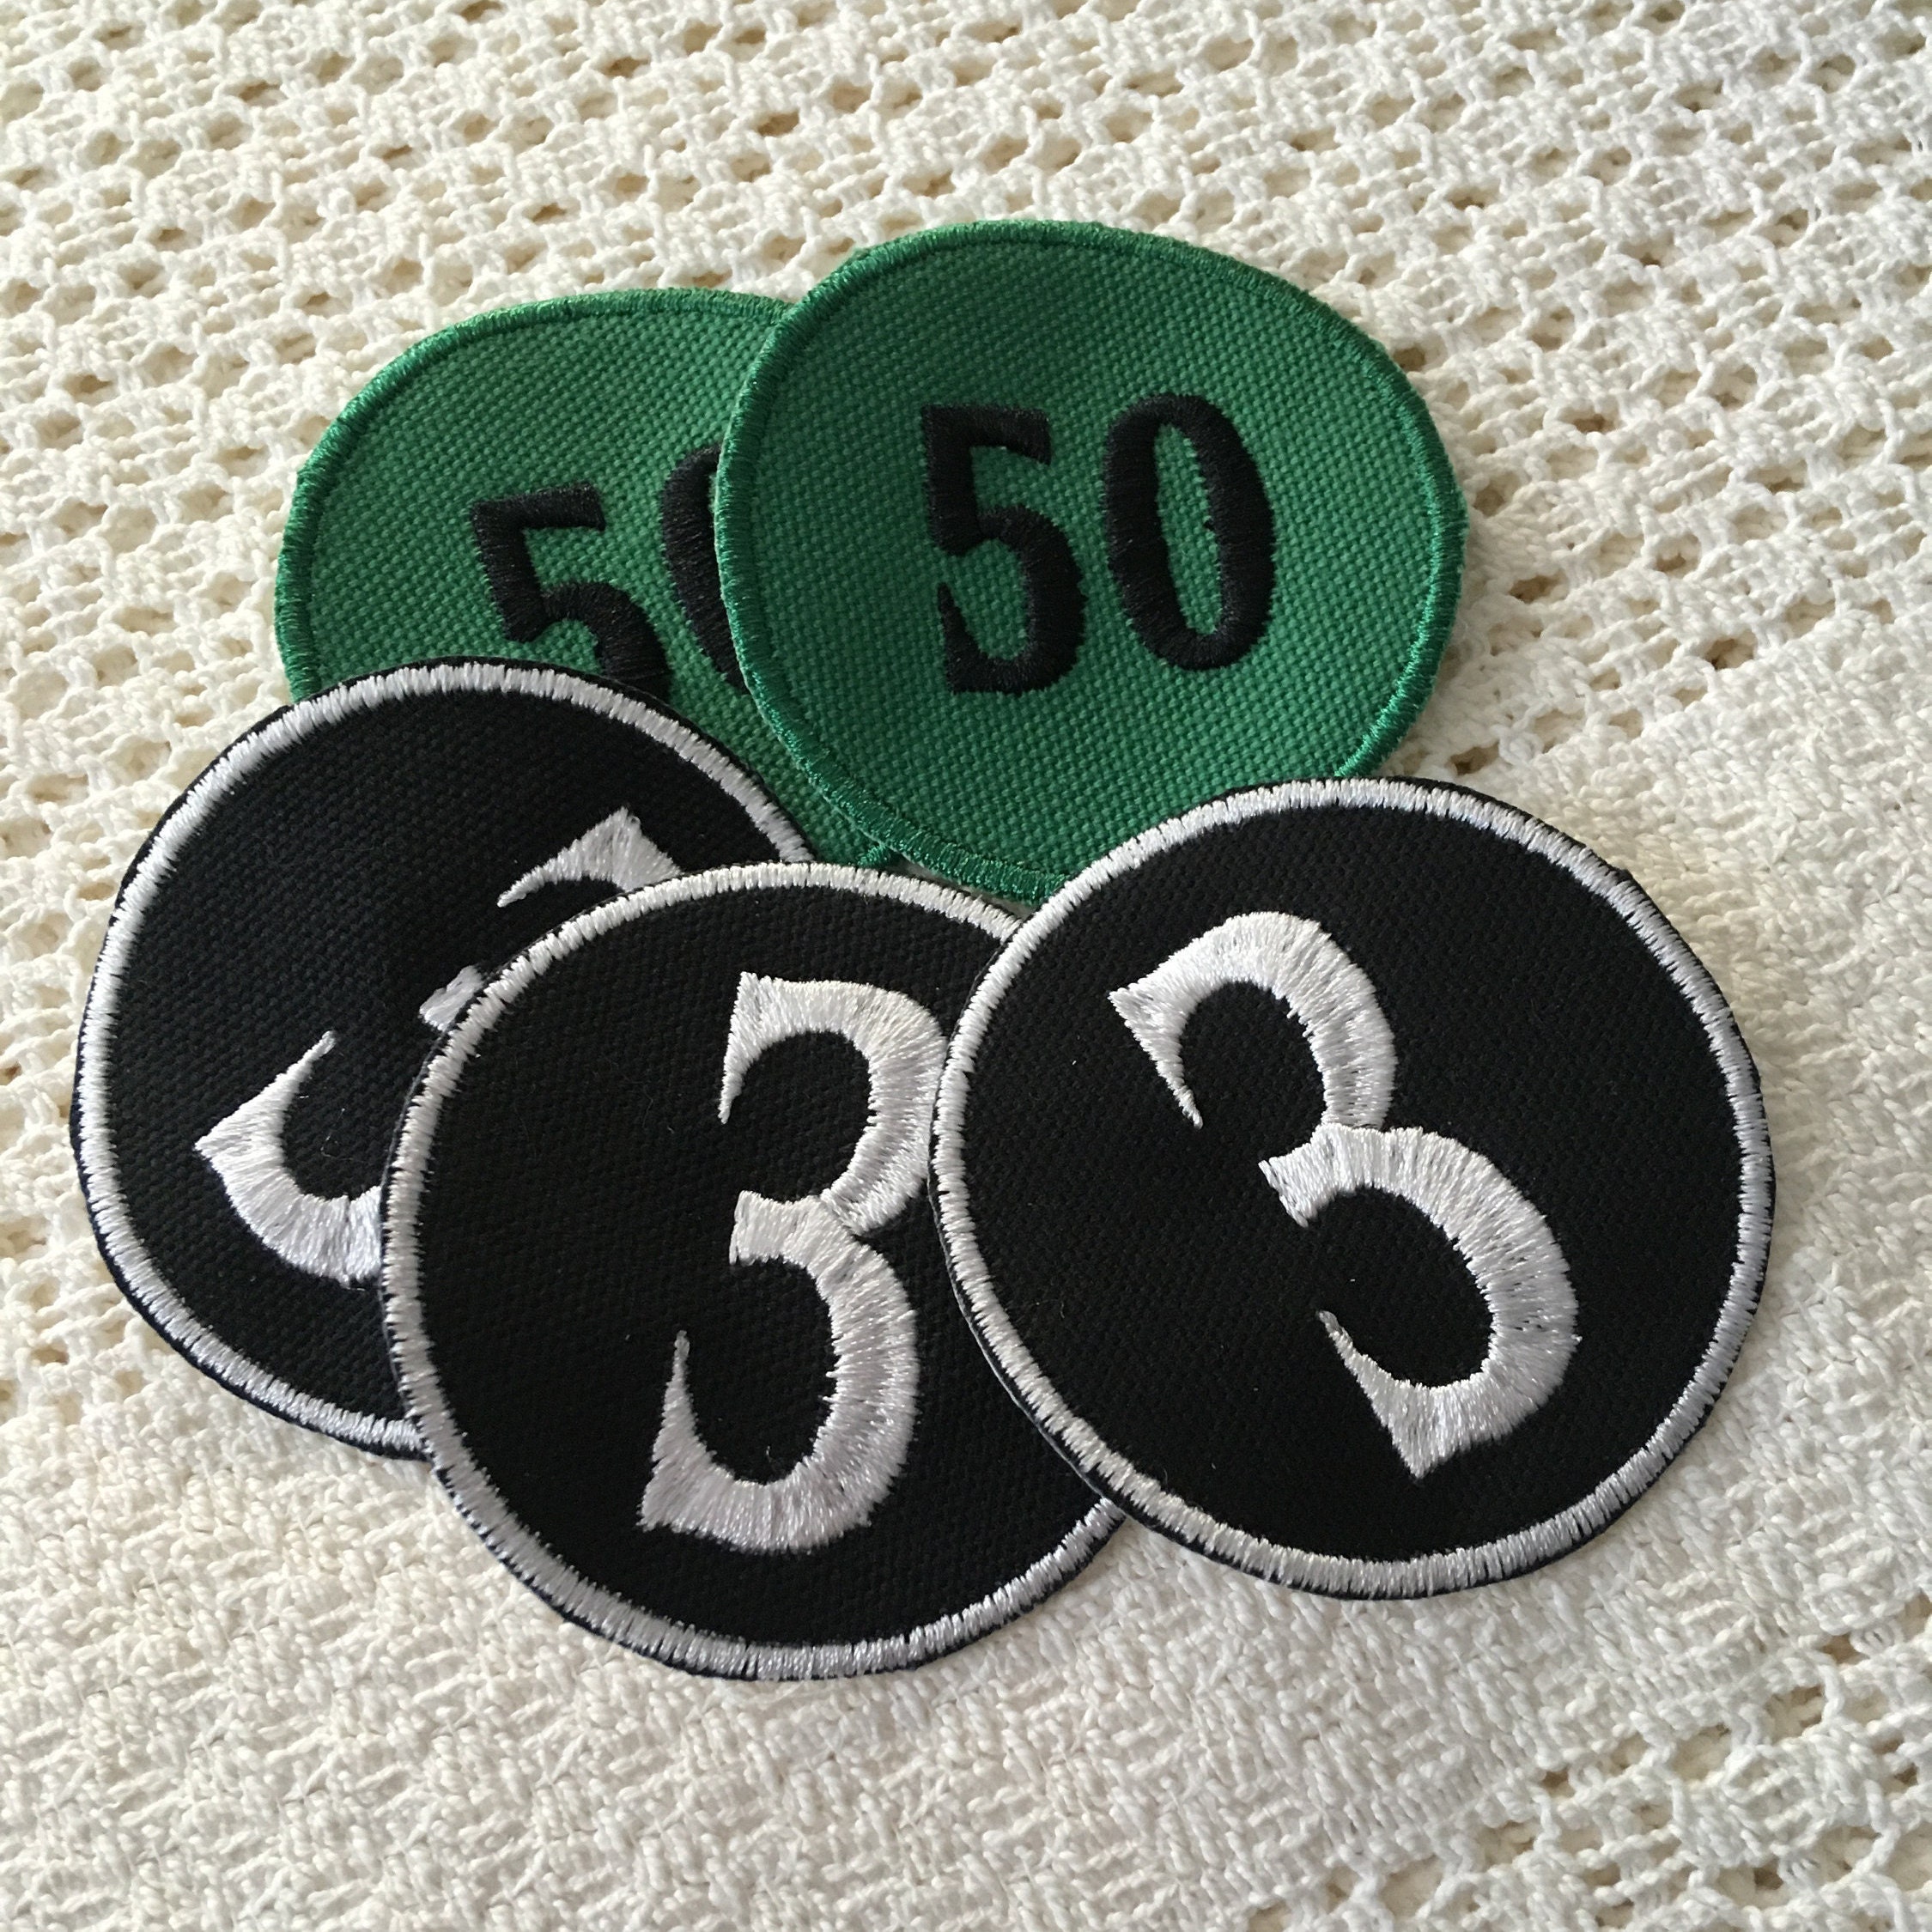 Round Number Patches, Embroidery Patches, 2 Inch Patch, Choose